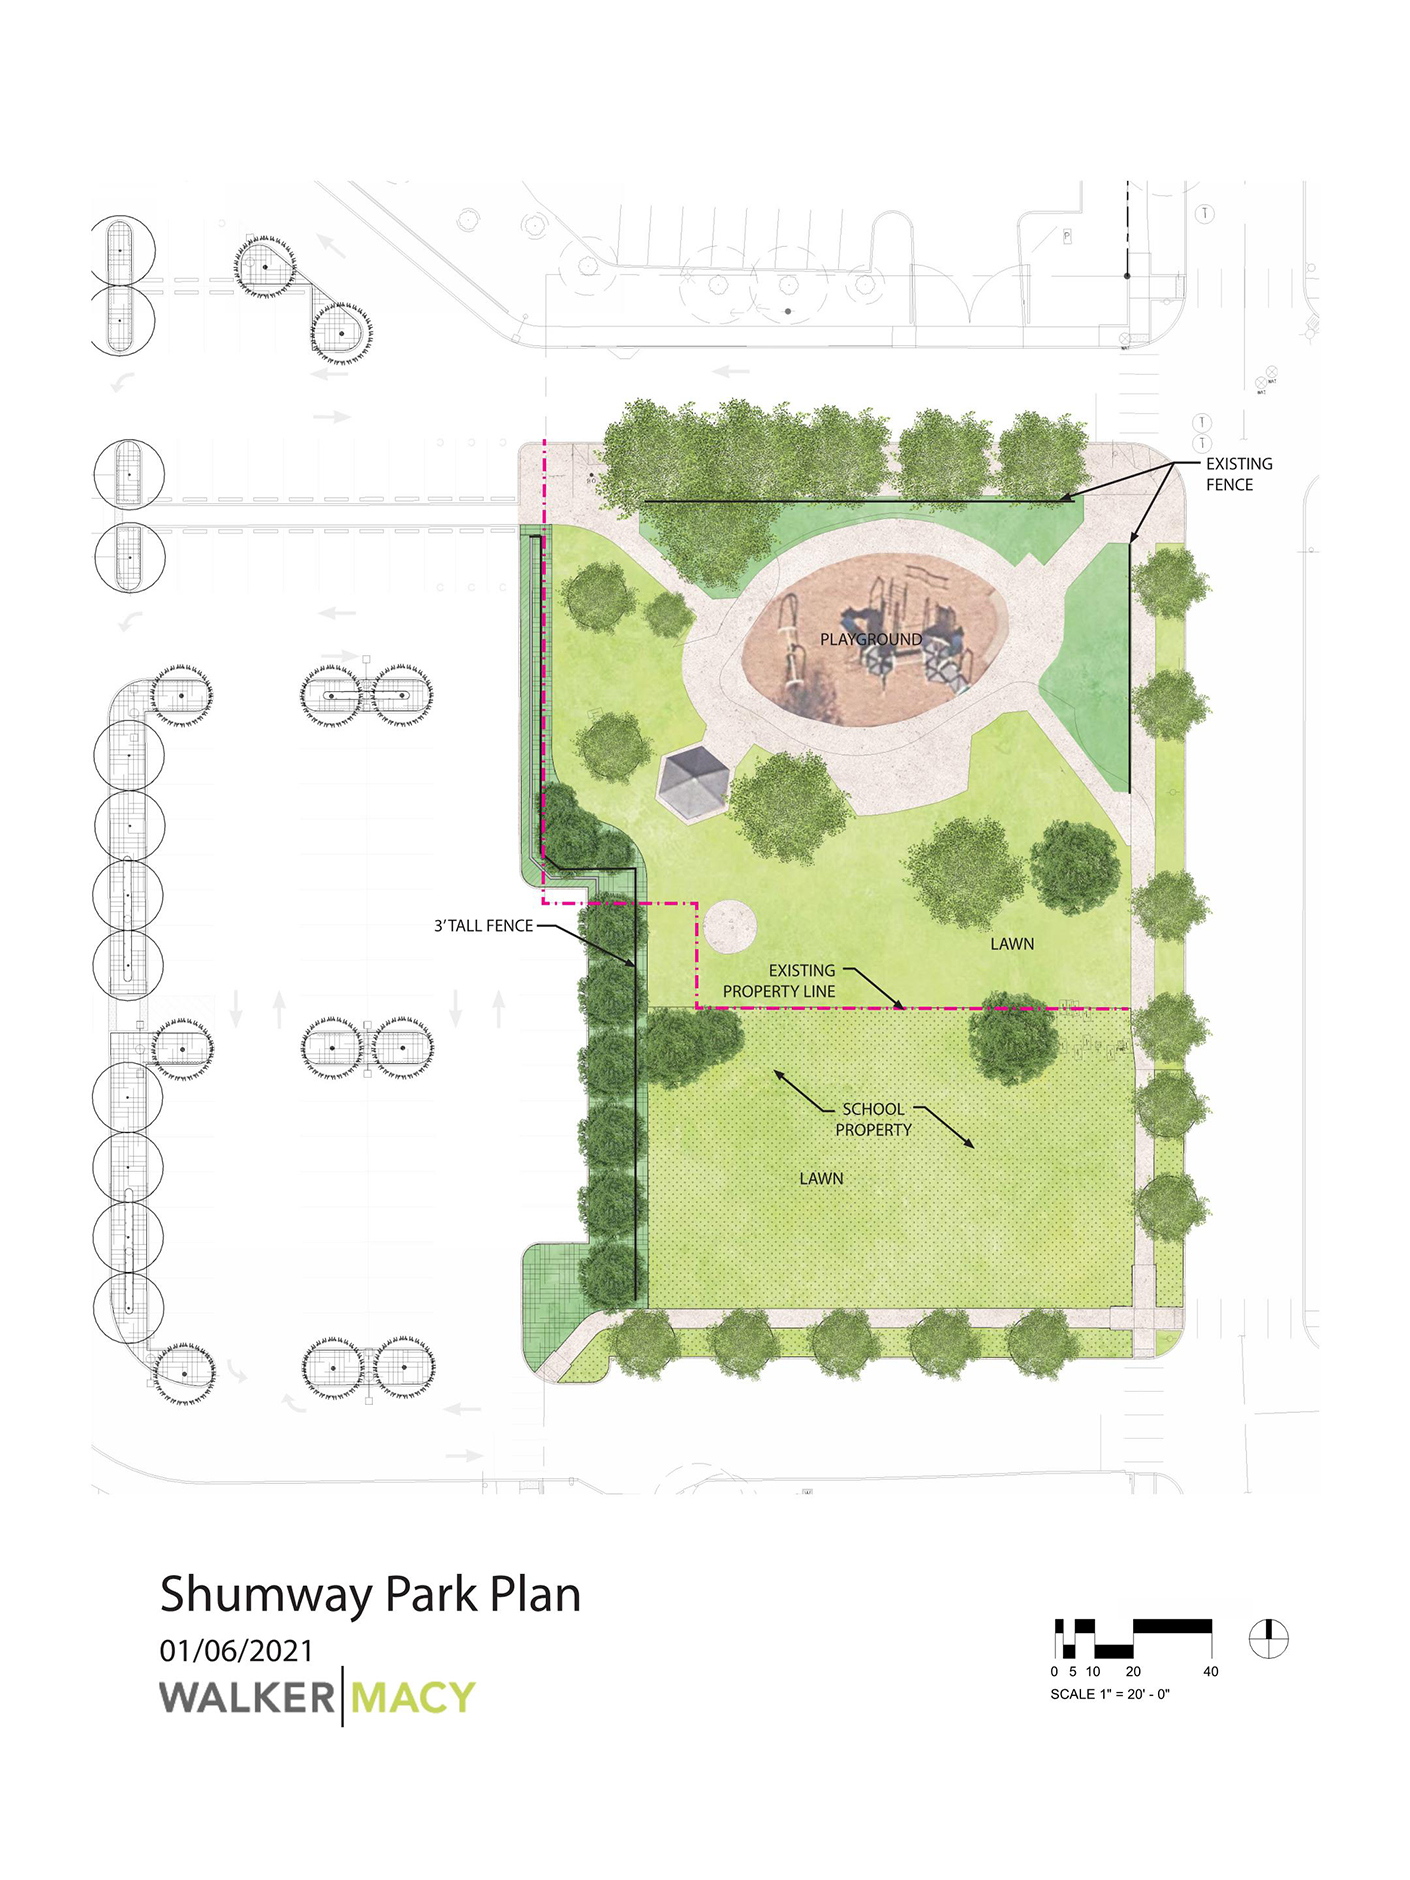 Rendering of the enhancements planned for Shumway Park